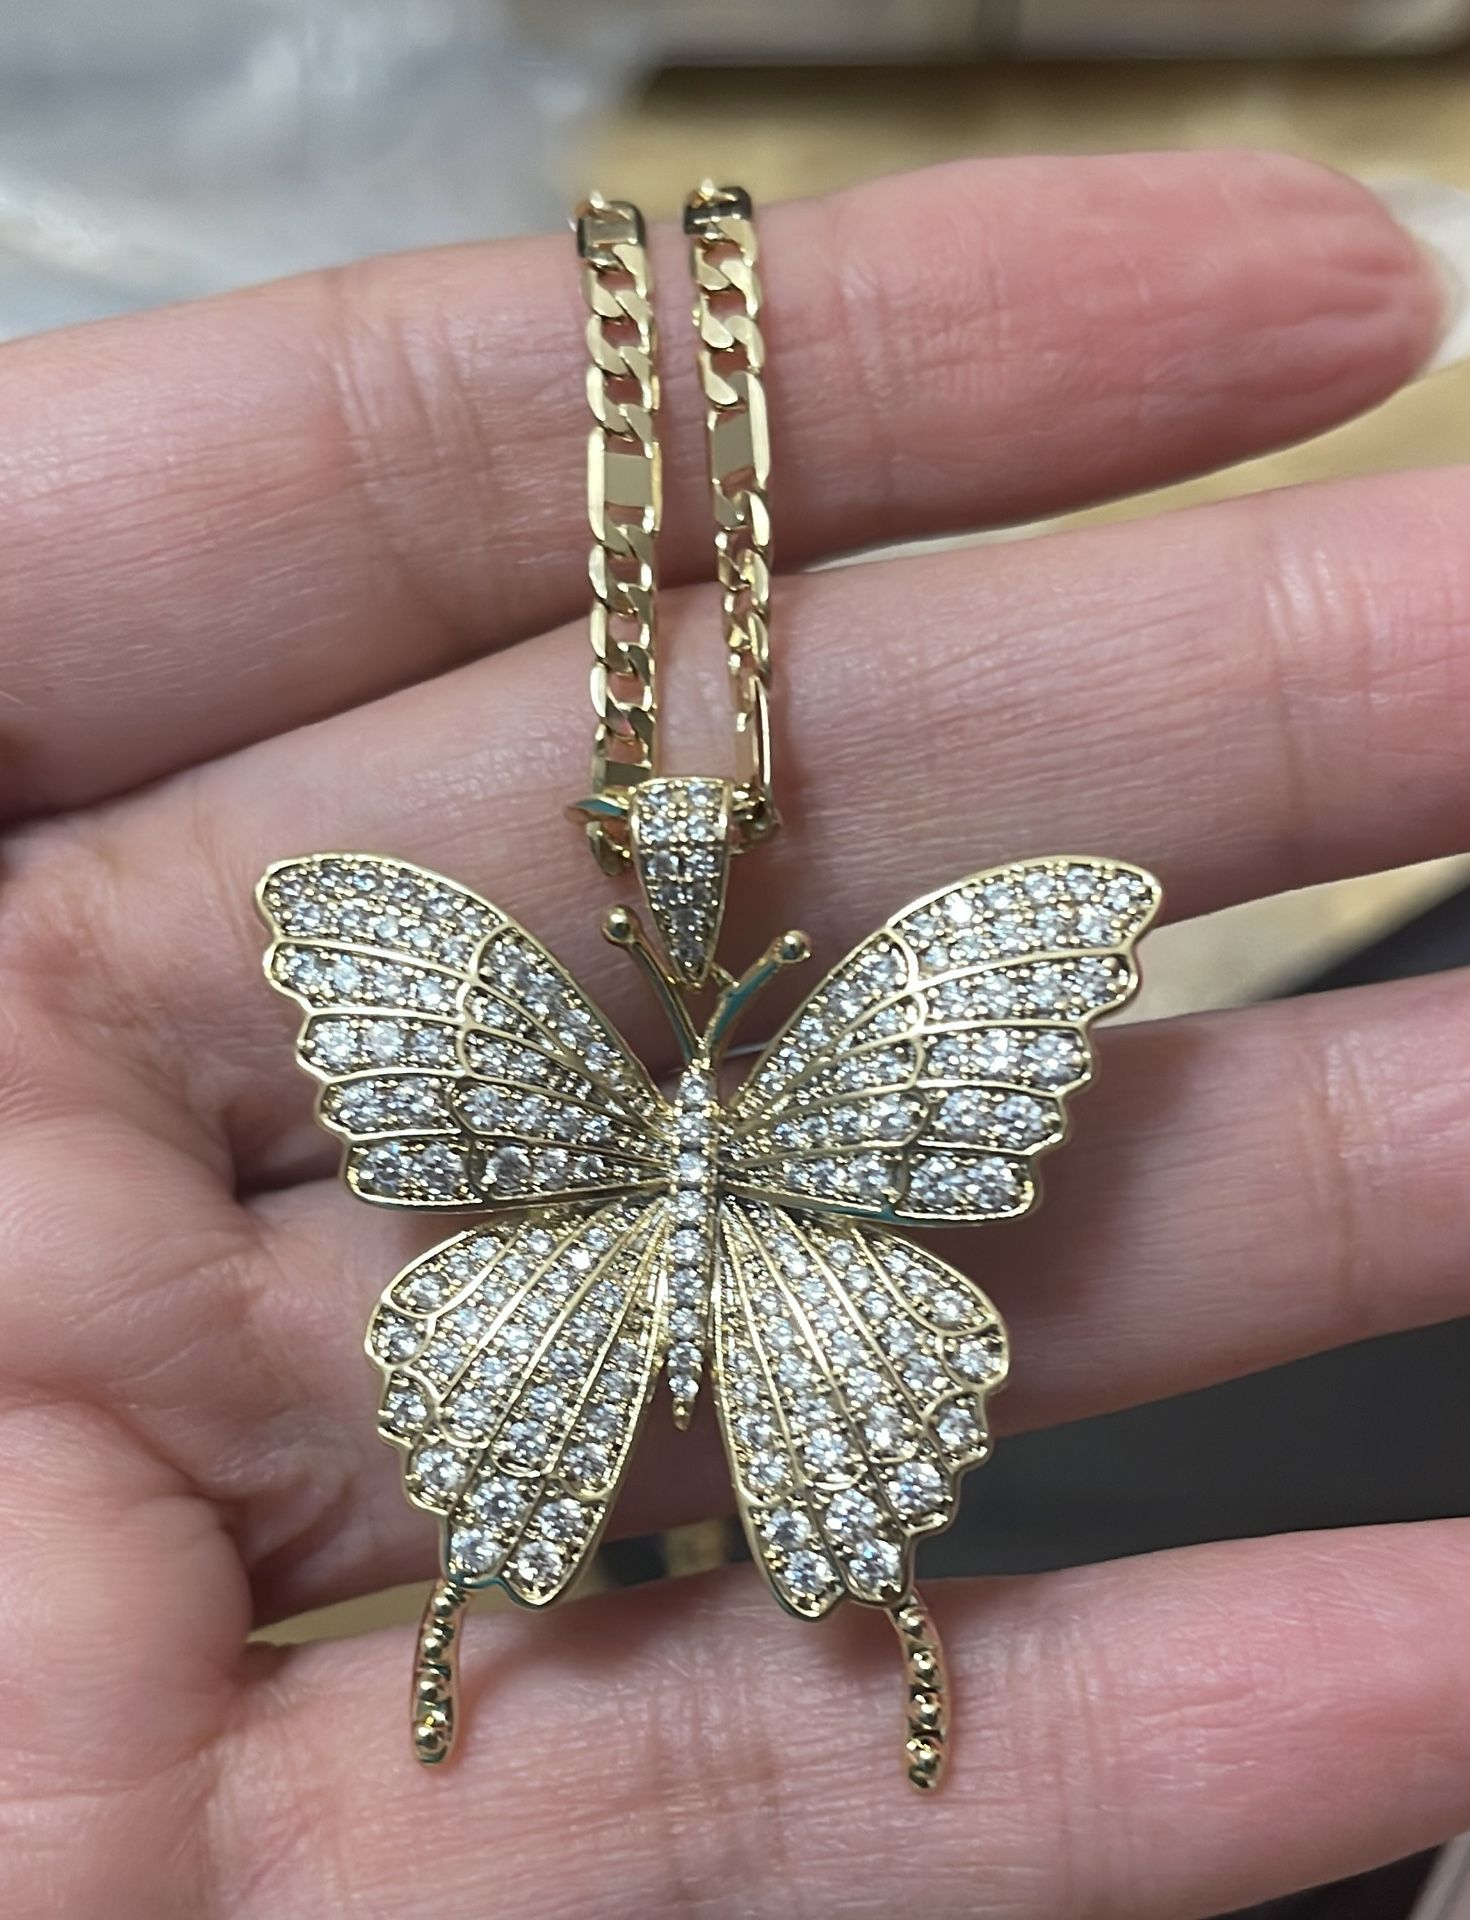 14kbutterfly Pendan And Chain22” Inch